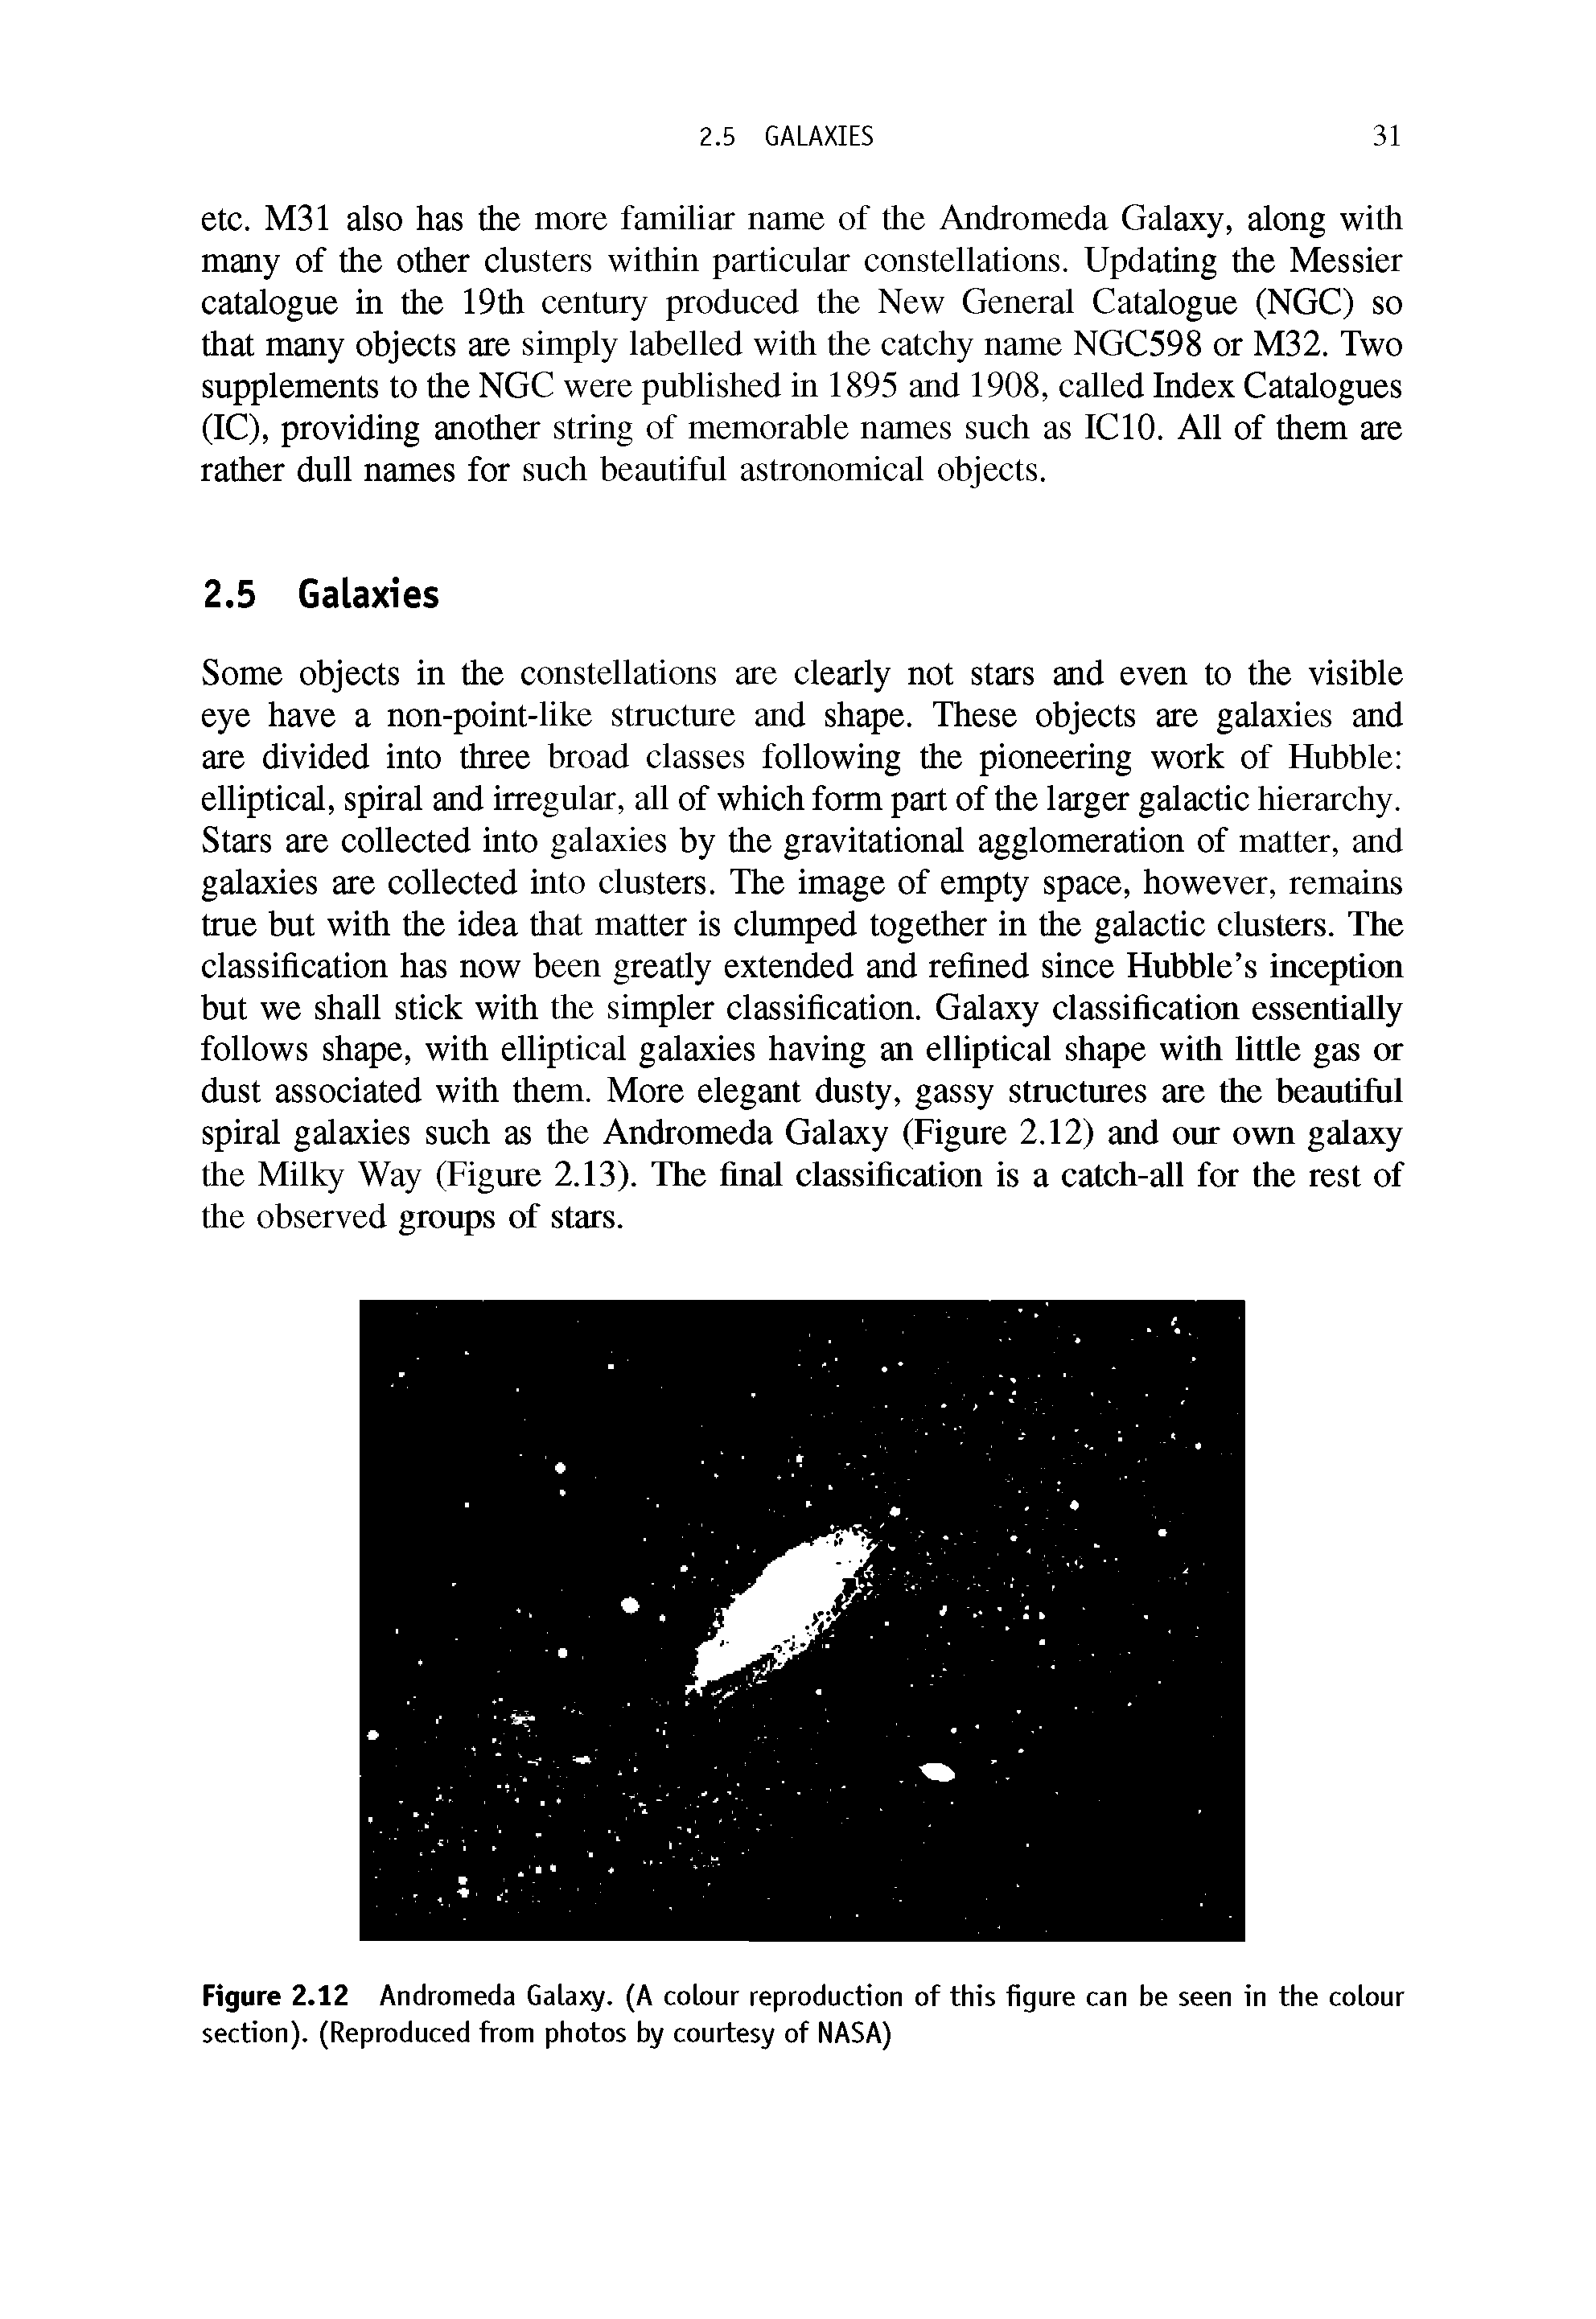 Figure 2.12 Andromeda Galaxy. (A colour reproduction of this figure can be seen in the colour section). (Reproduced from photos by courtesy of NASA)...